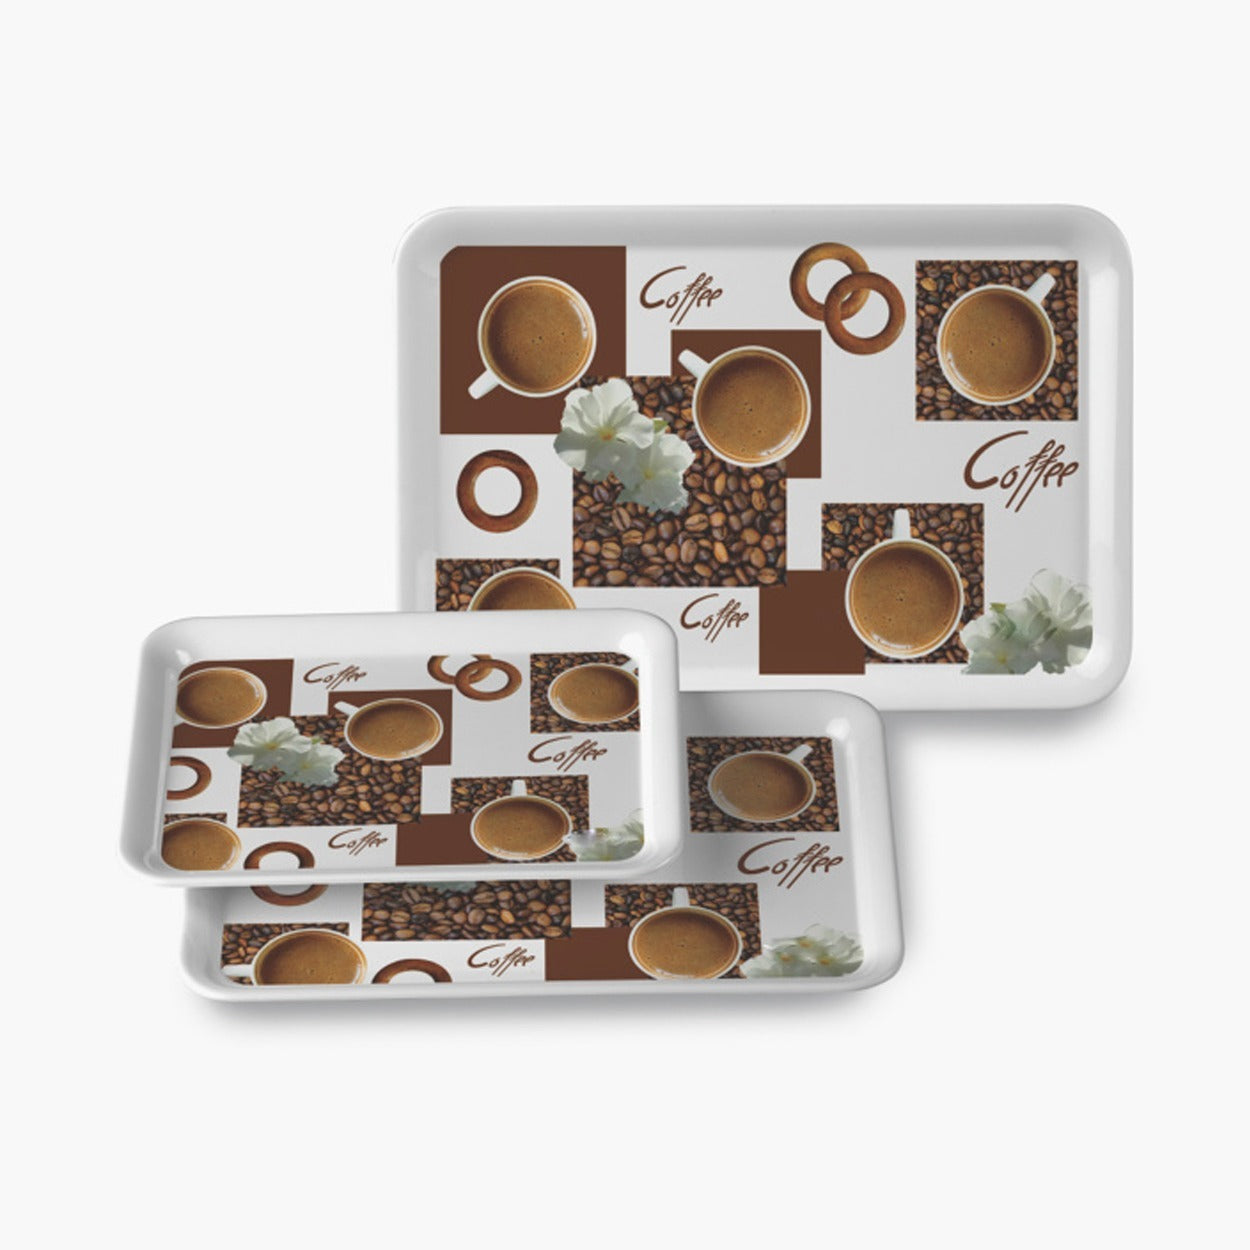 2292 Serving Tray Set  (Pack of 3 Pcs) (Small, Medium, Large) (Multicolour) 